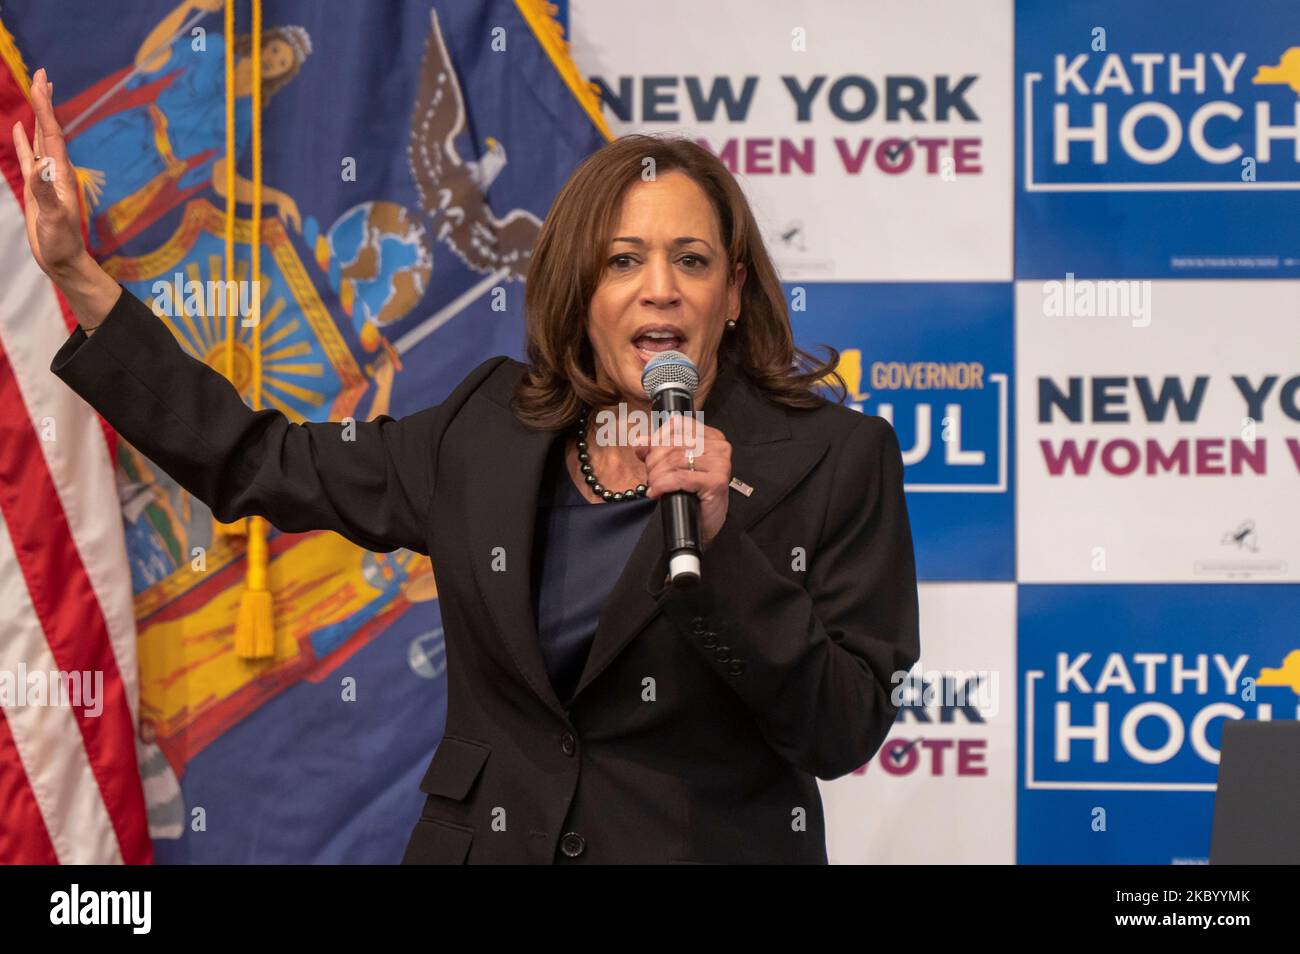 NEW YORK, NEW YORK - NOVEMBER 03: Vice President Kamala Harris speaks during a New York Women "Get Out The Vote" rally at Barnard College on November 03, 2022 in New York City. Vice President Kamala Harris and Secretary Hillary Rodham Clinton joined Gov. Kathy Hochul and Attorney General Letitia James as they campaigned at a New York Women GOTV rally with the midterm elections under a week away. Hochul holds a slim lead in the polls against Republican candidate Rep. Lee Zeldin. AG James is favored to beat Republican candidate for Attorney General Michael Henry. Stock Photo